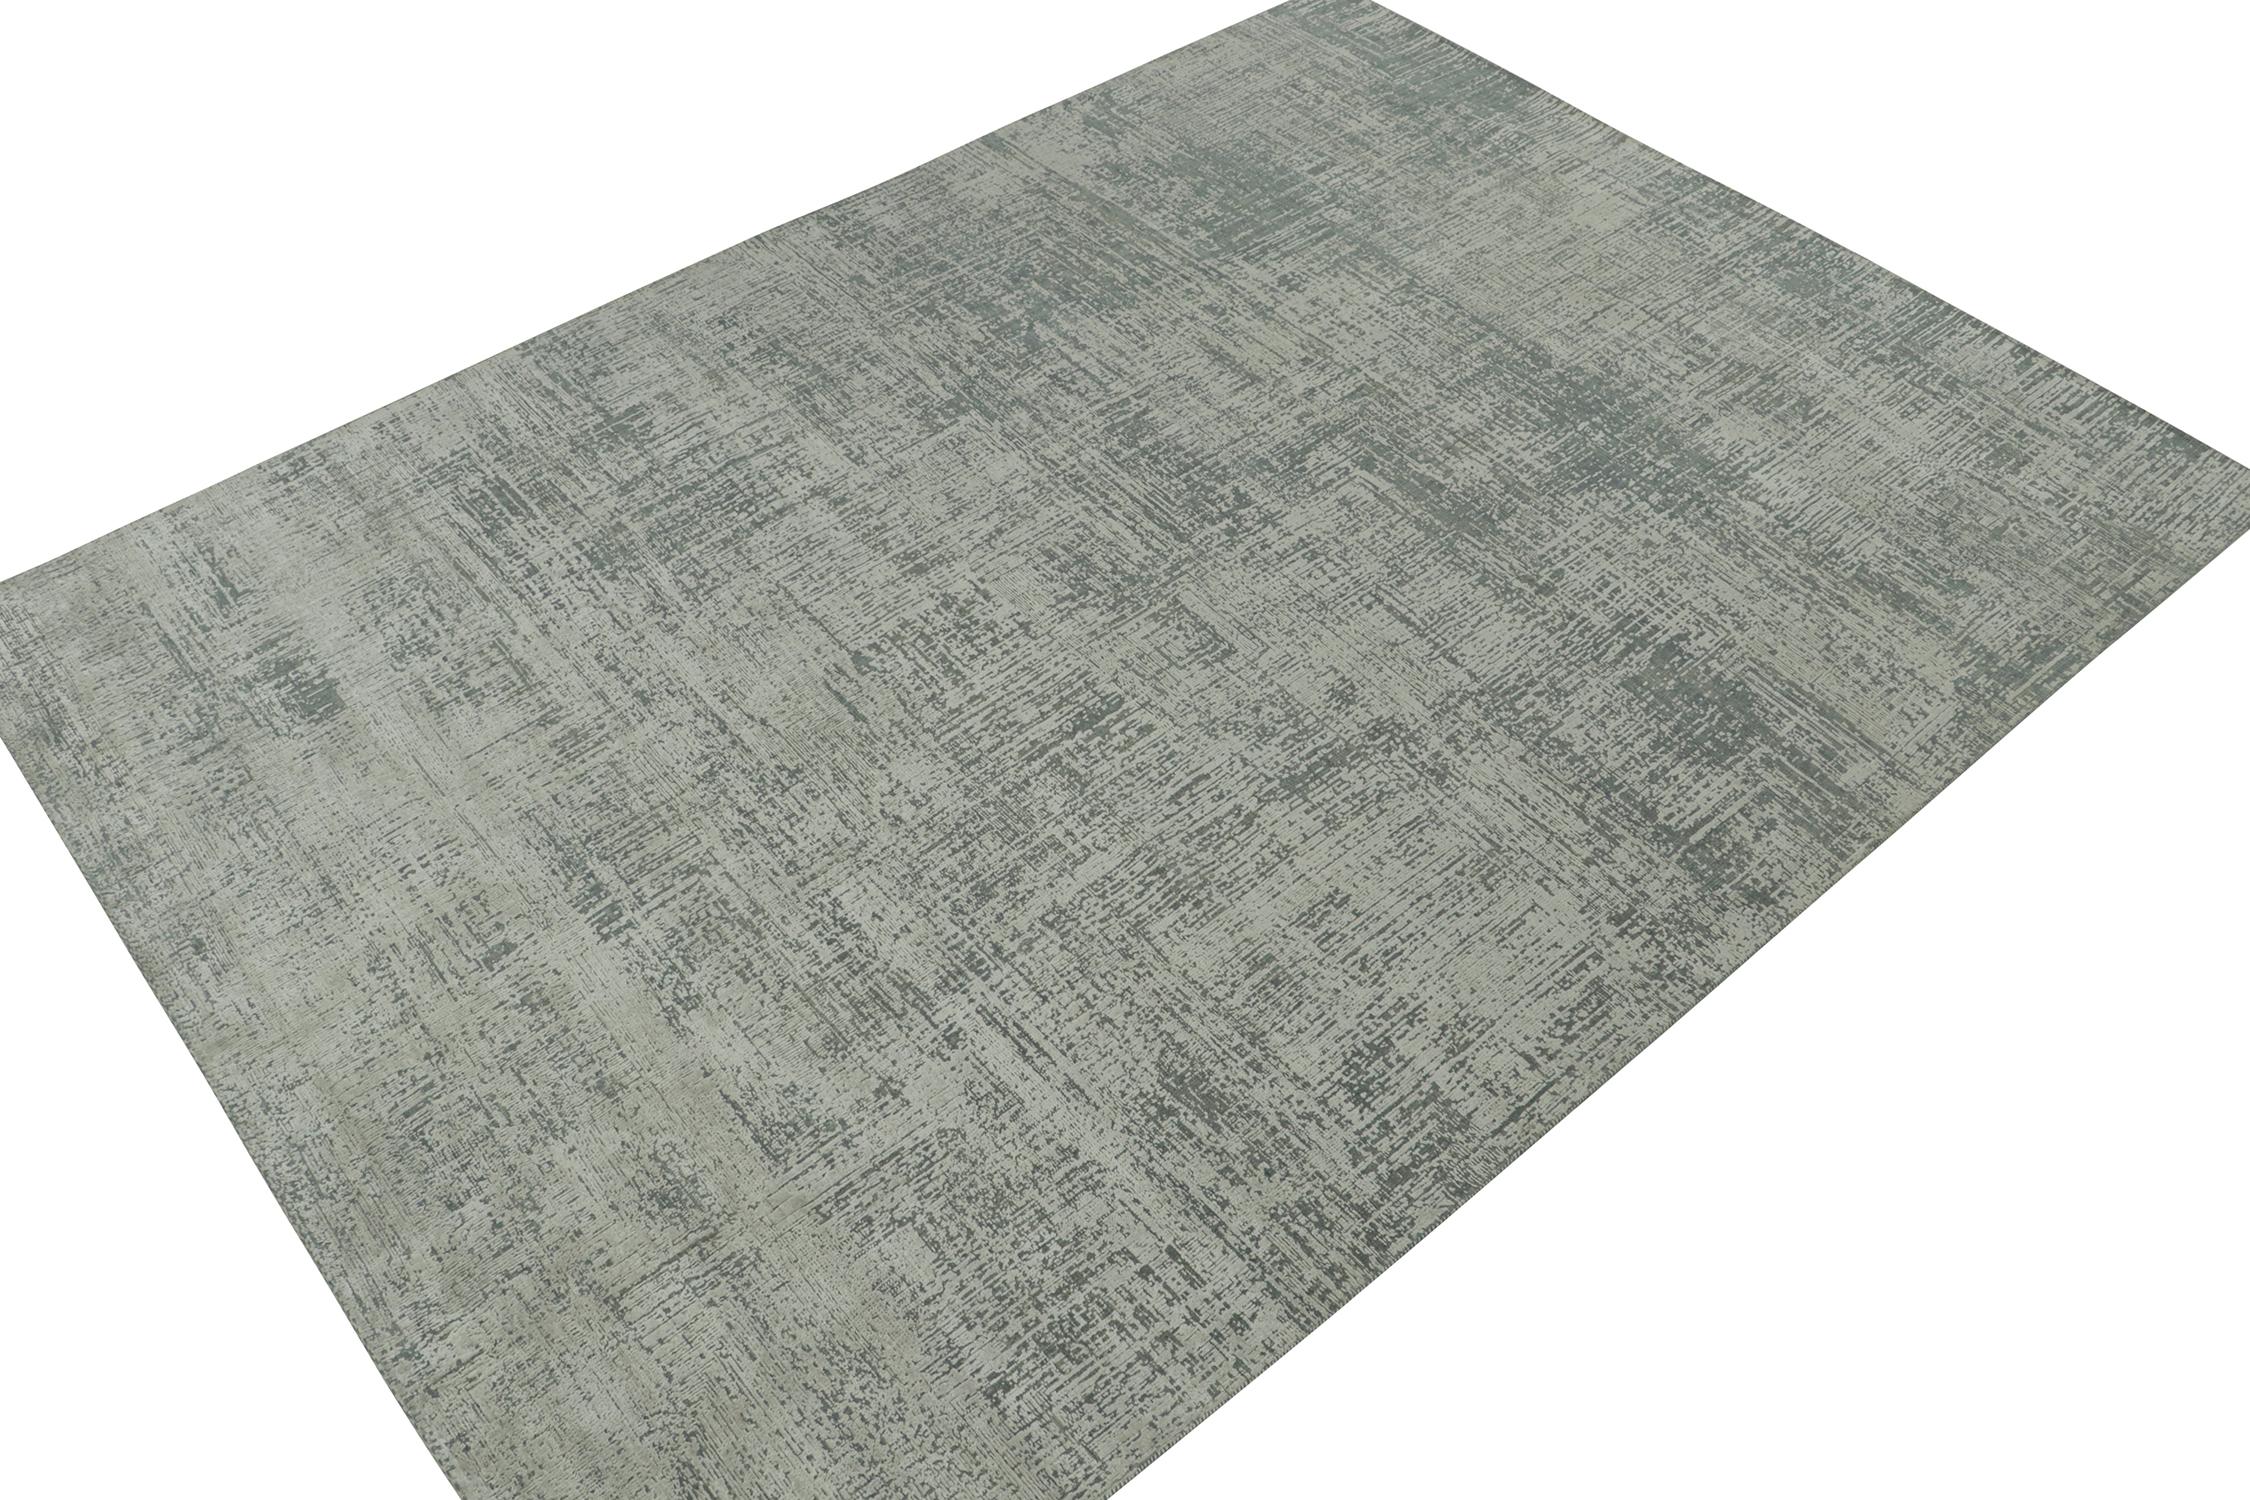 This 9x12 abstract rug is the next splendid addition to Rug & Kilim’s bold modern rug designs. Hand-knotted in wool and silk.
Further on the Design: 
This piece enjoys geometric streaks in gray and stone blue accents, and a gorgeous sense of subdued